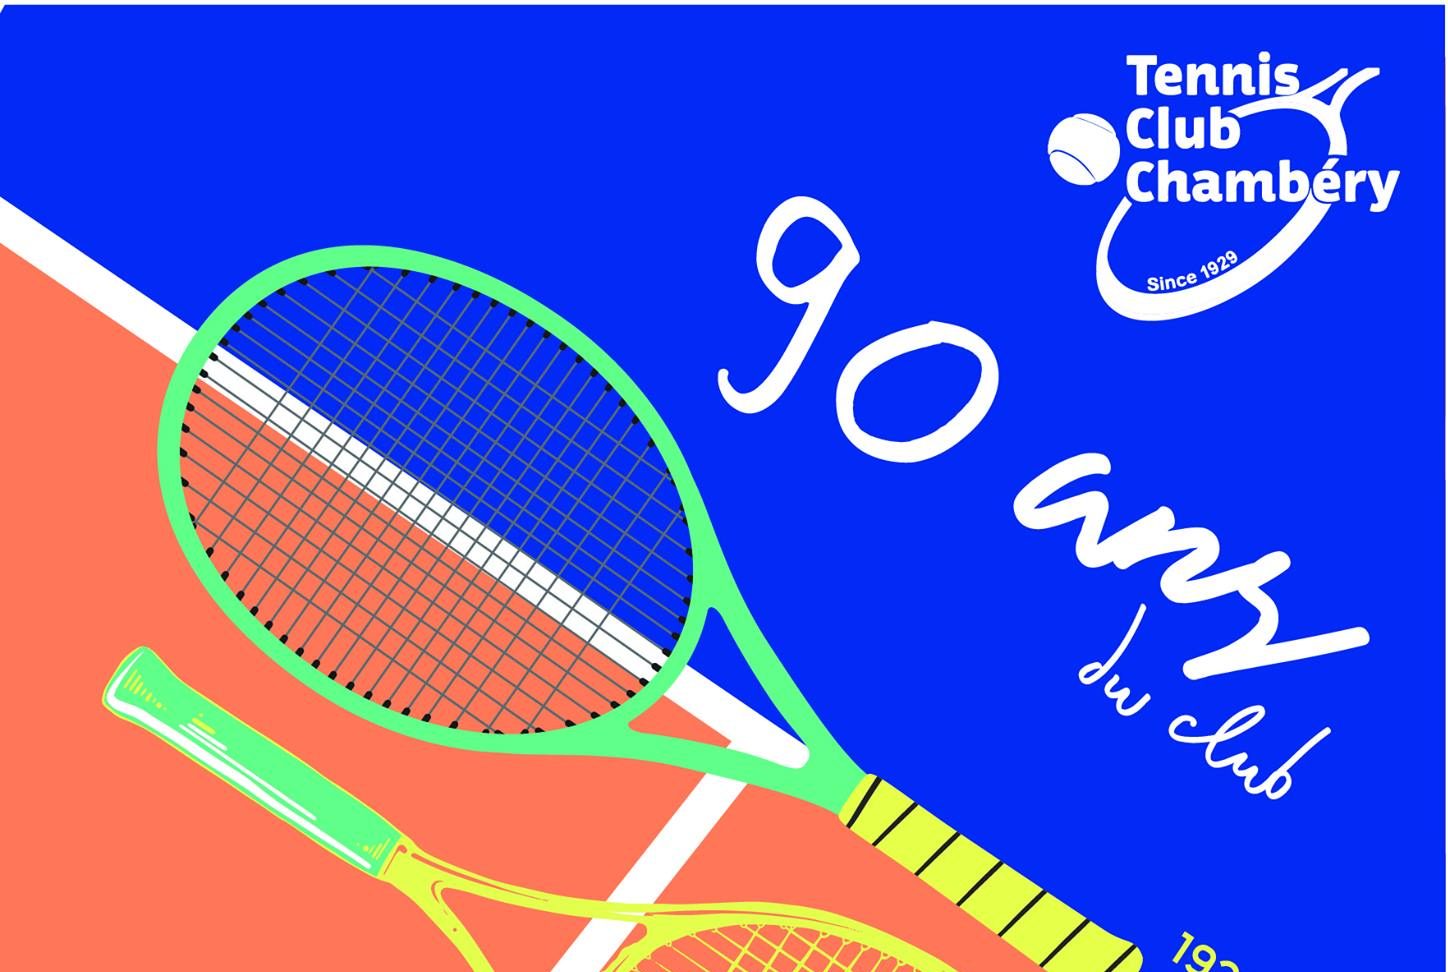 Chambéry launches its padel